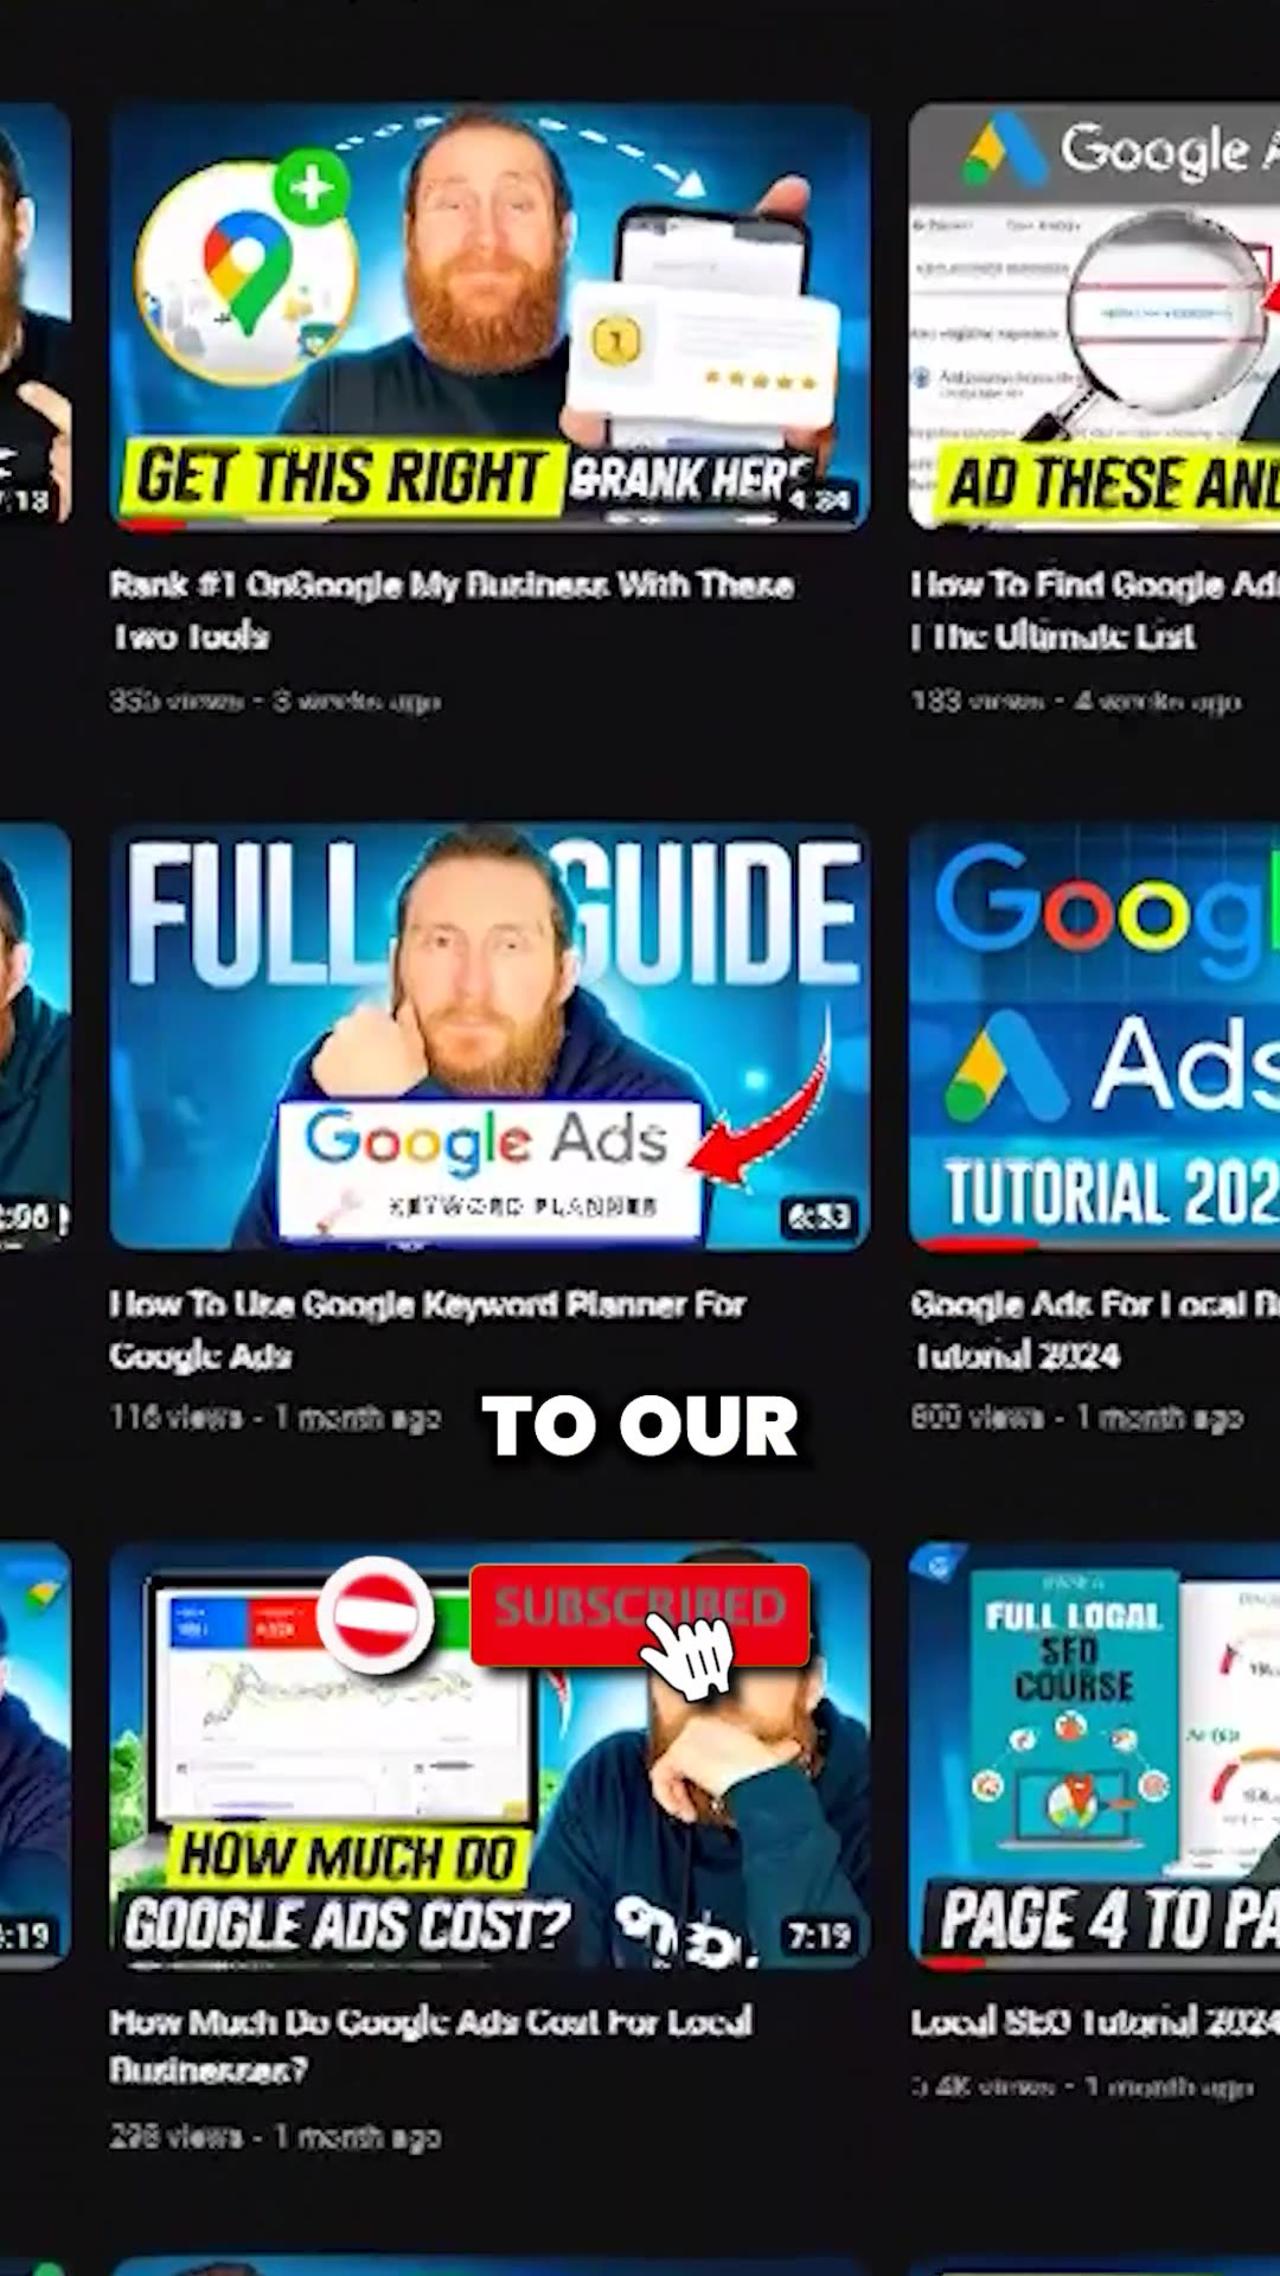 Effective Small Budget Strategies For Google Ads [Video]